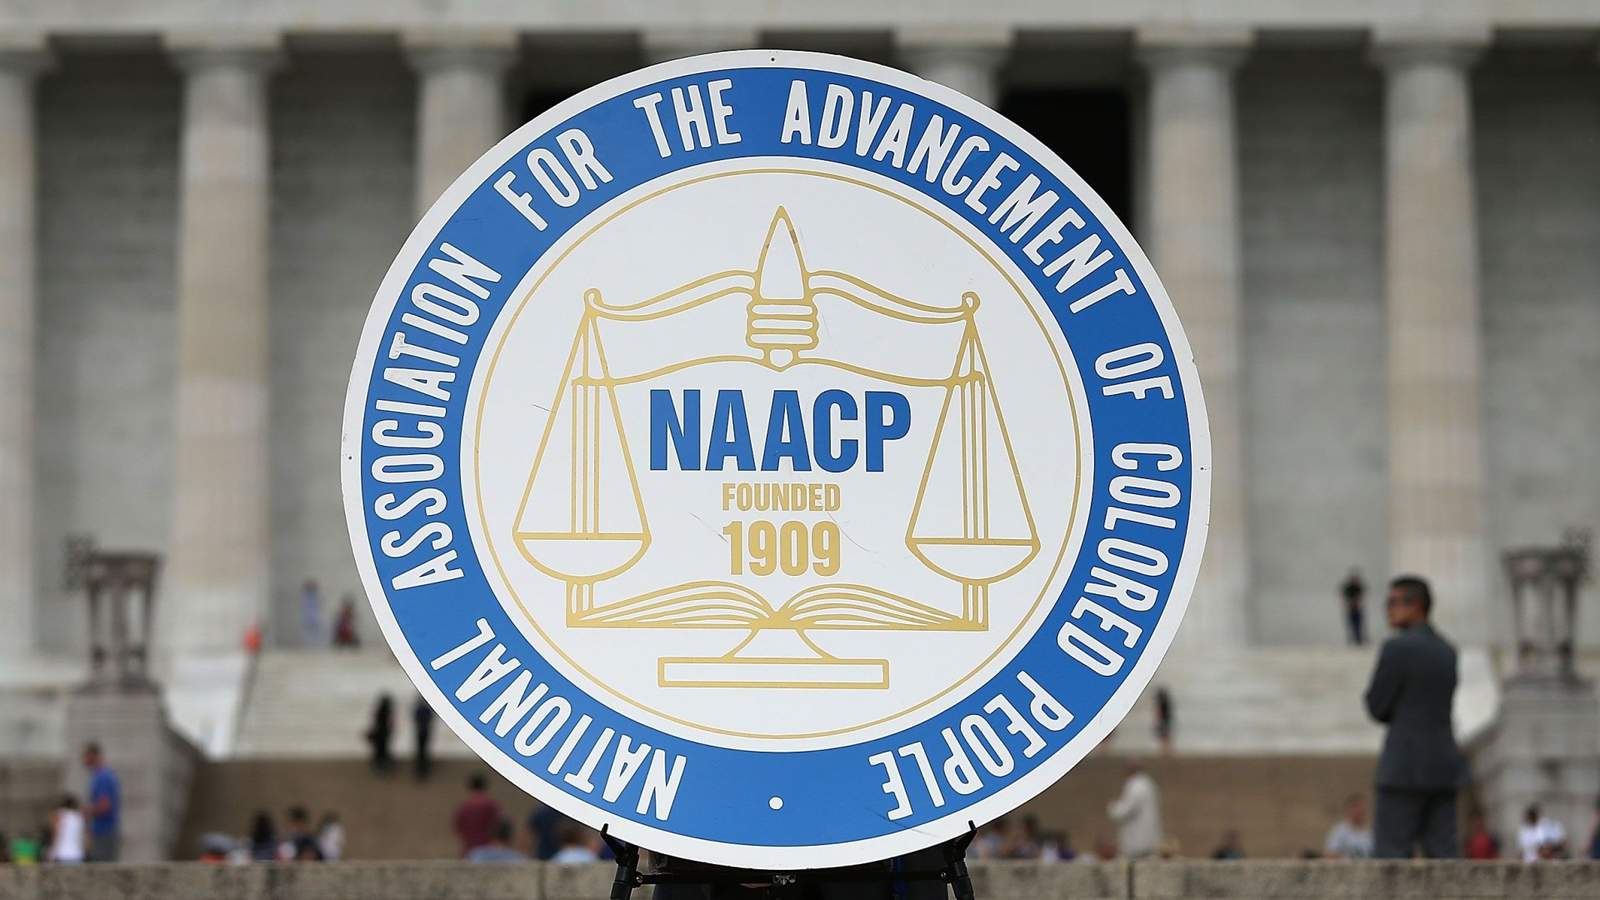 Highlands community to resurge local chapter of NAACP